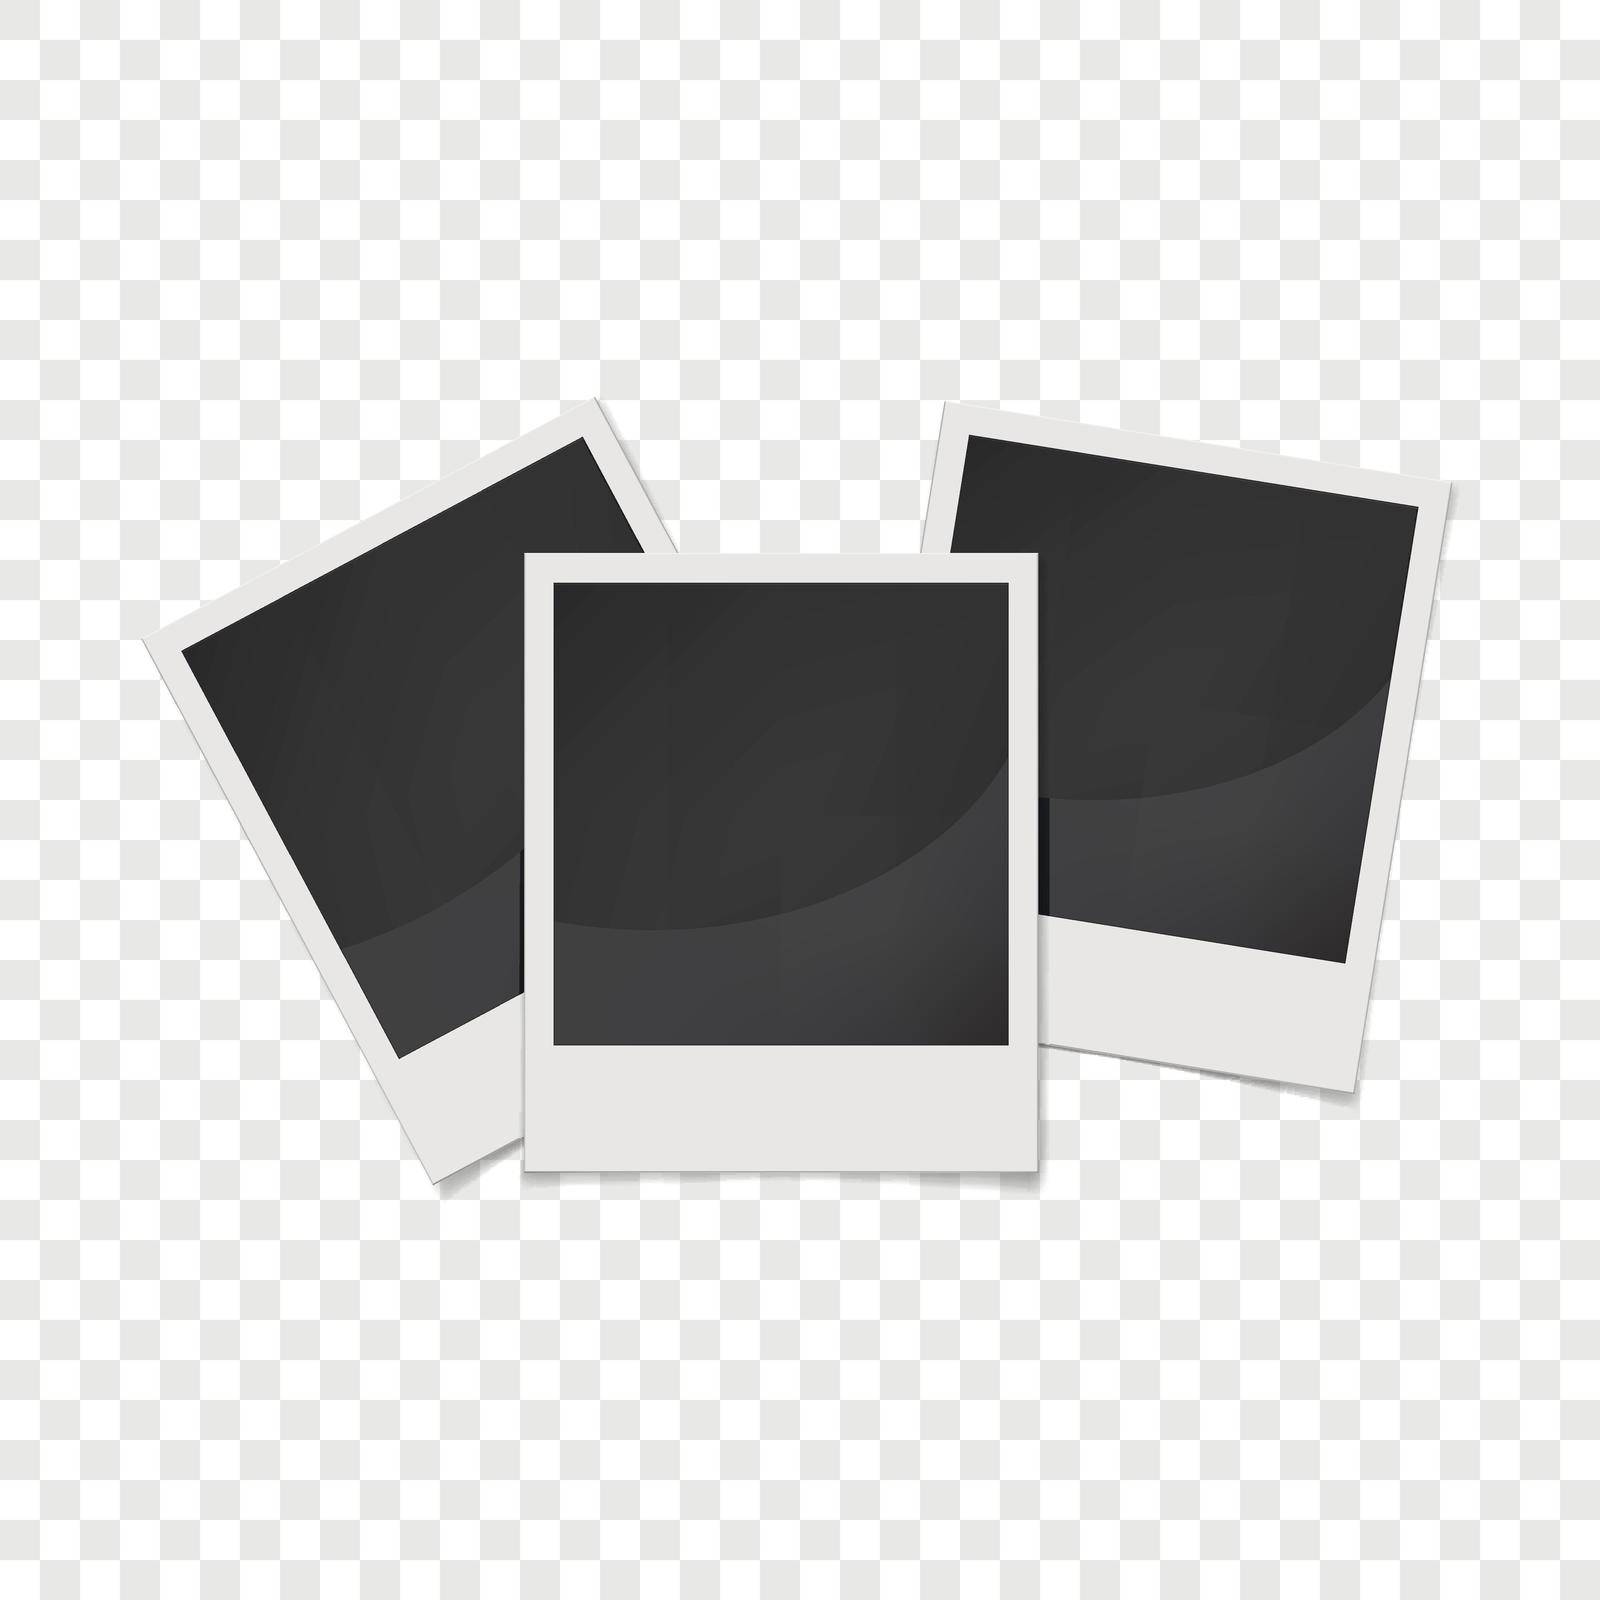 Realistic photo frame icon. Universal photo frames icon to use for web and mobile UI vector illustration